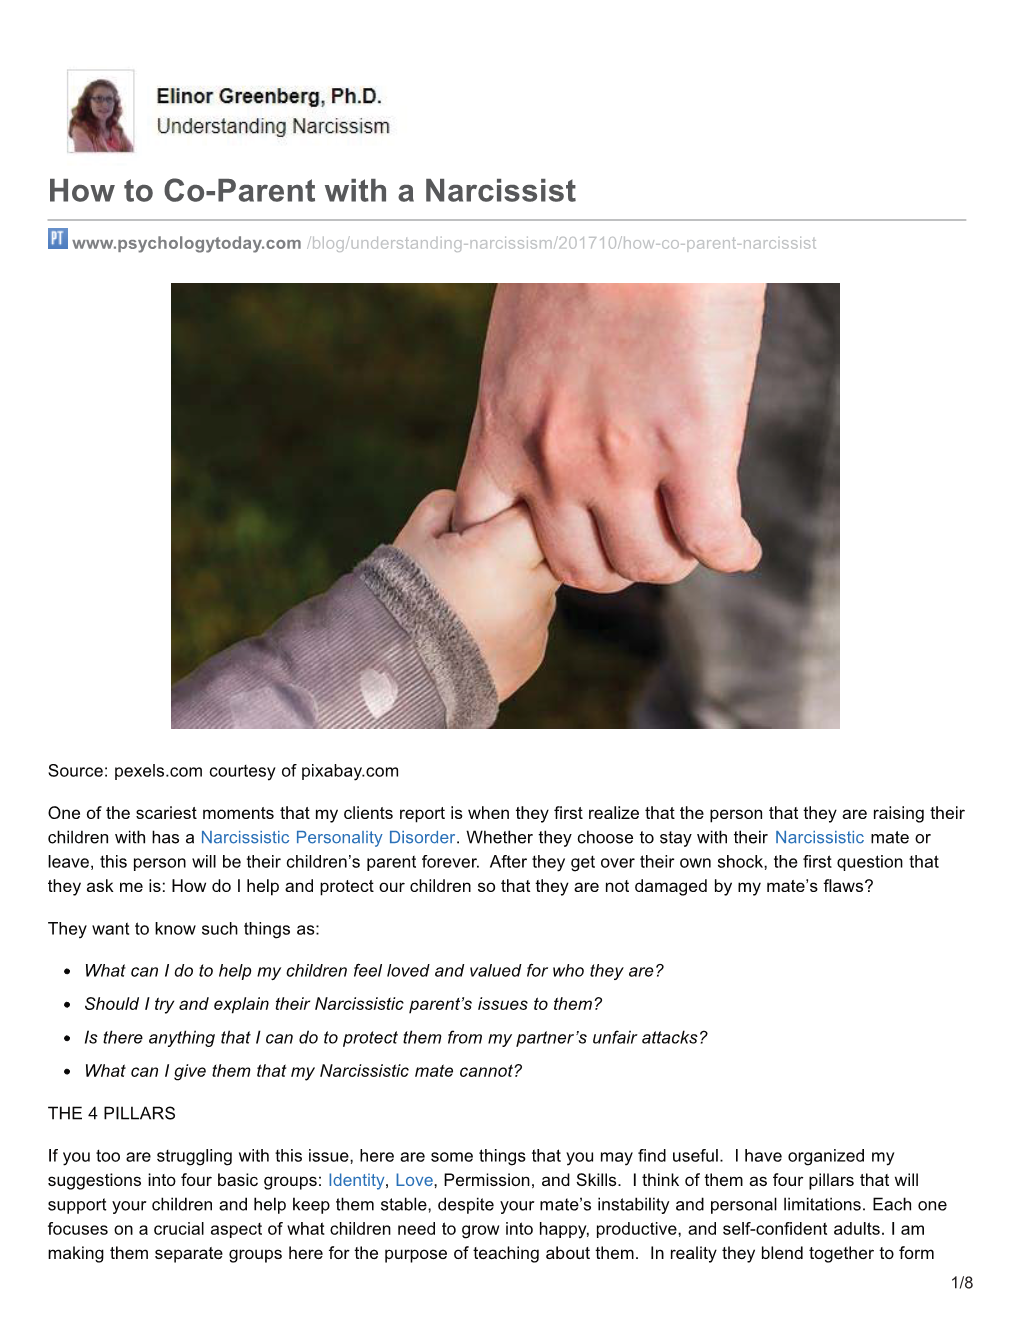 How to Co-Parent with a Narcissist